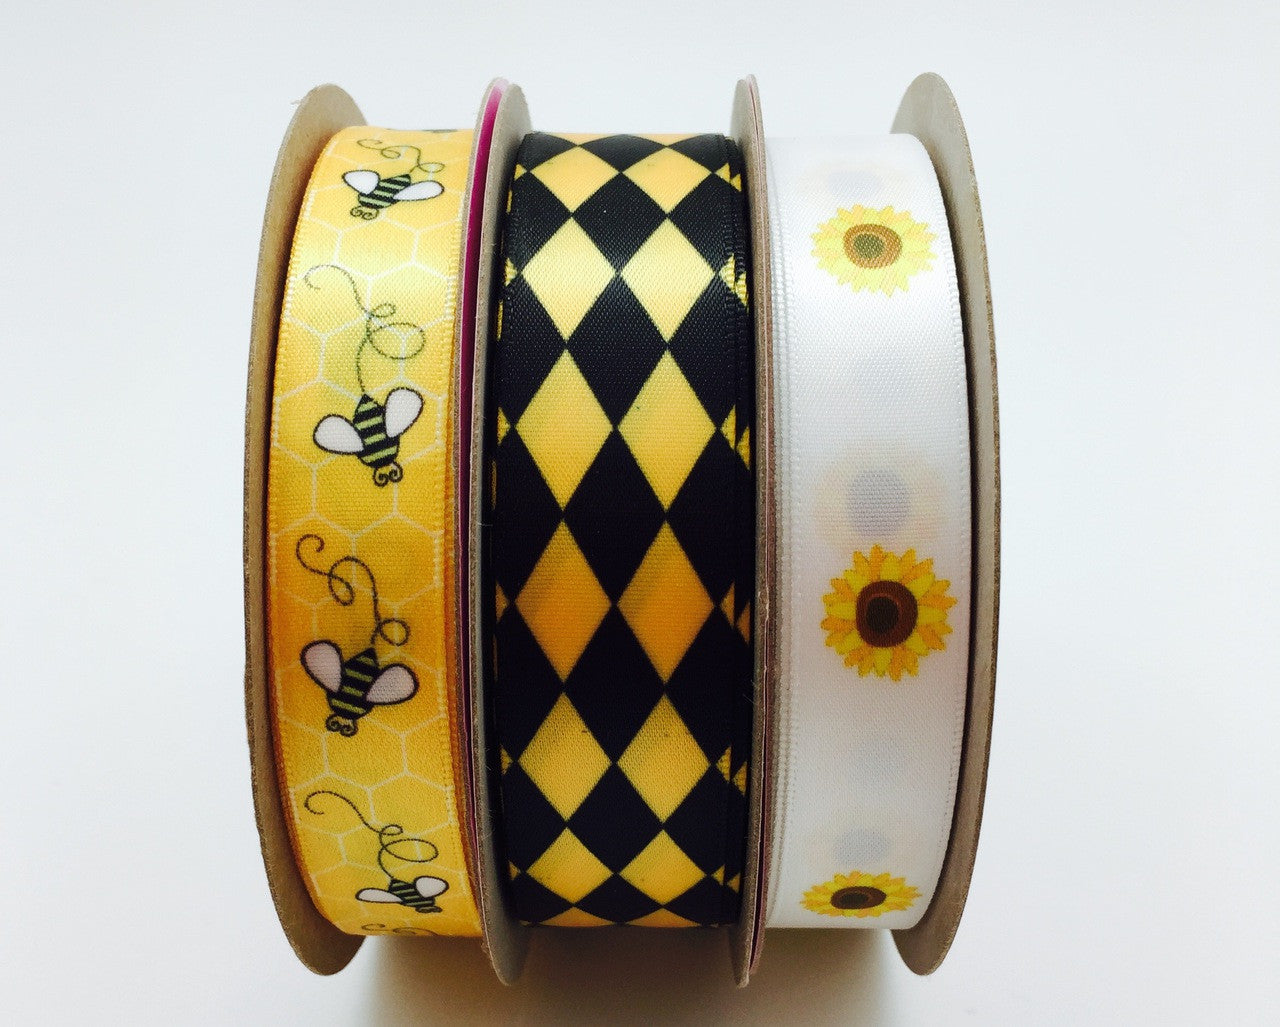 Our bees mix perfectly with our sunflowers and yellow and black harlequin! Be sure to mix and match when wrapping gifts or planning party decor!